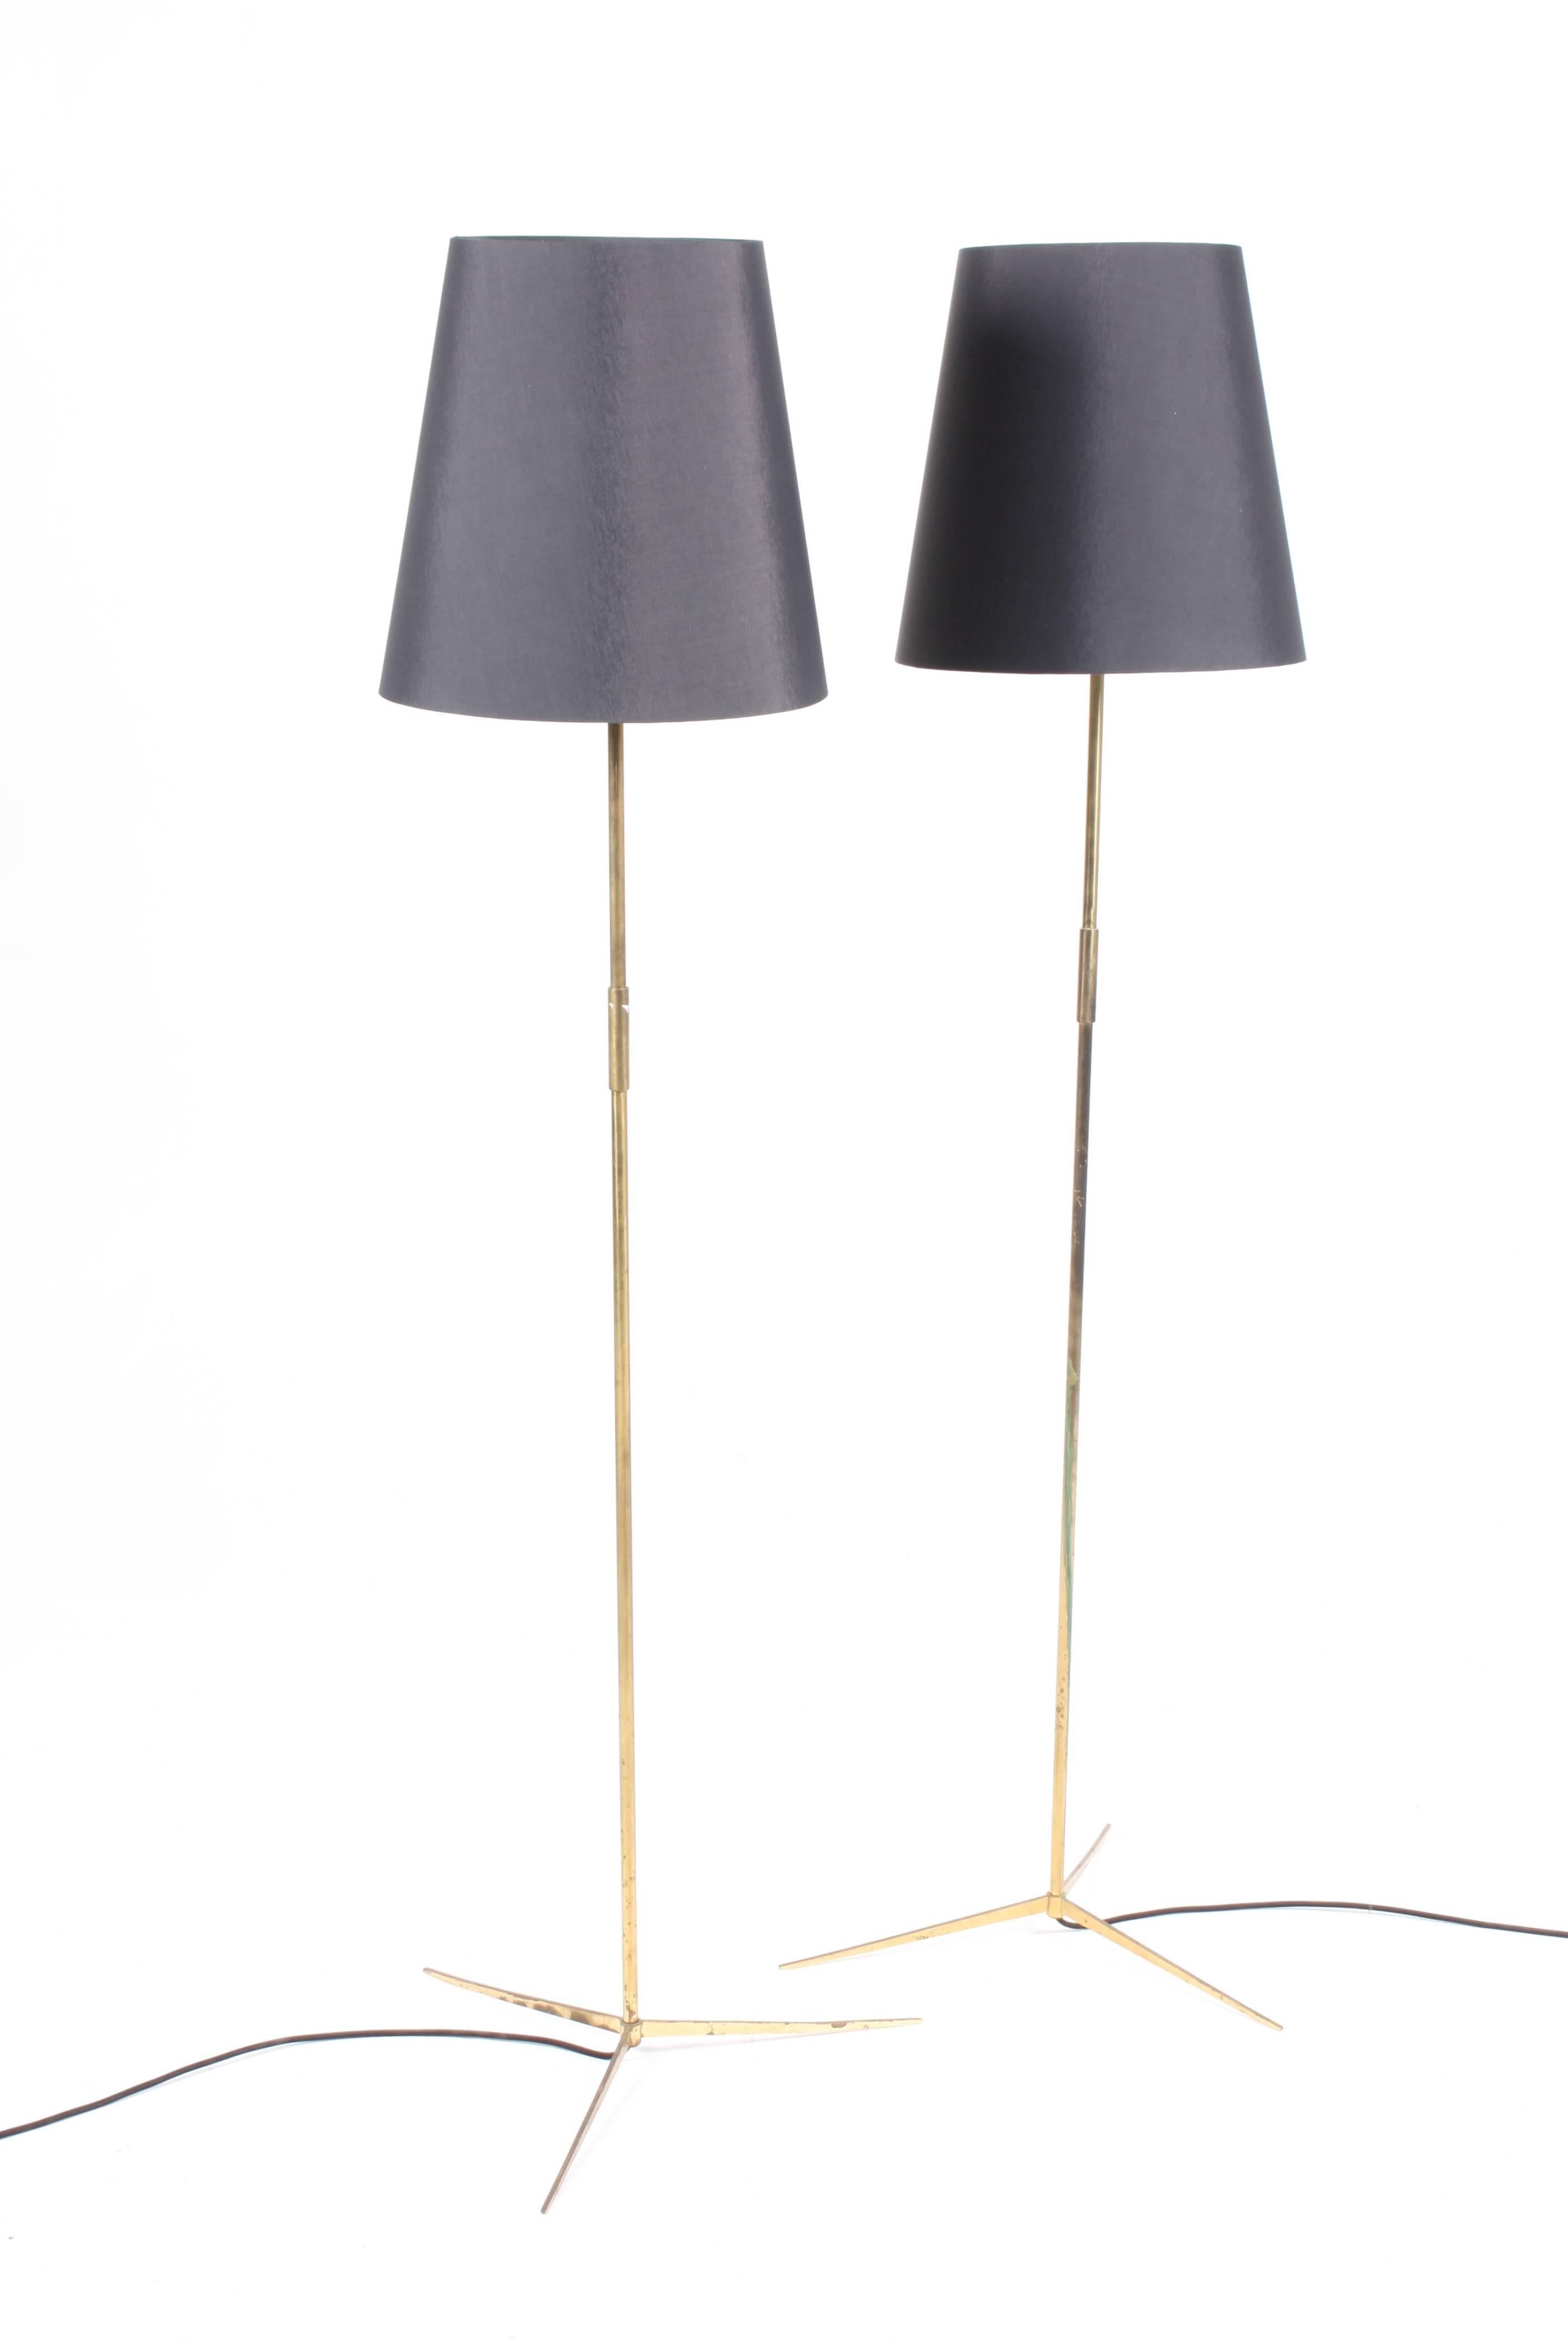 Pair of elegant floor lamps in patinated brass. This lamp is a Fine example of minimalistic Scandinavian design and quality. Designed and made by Holm Sørensen, circa 1960.